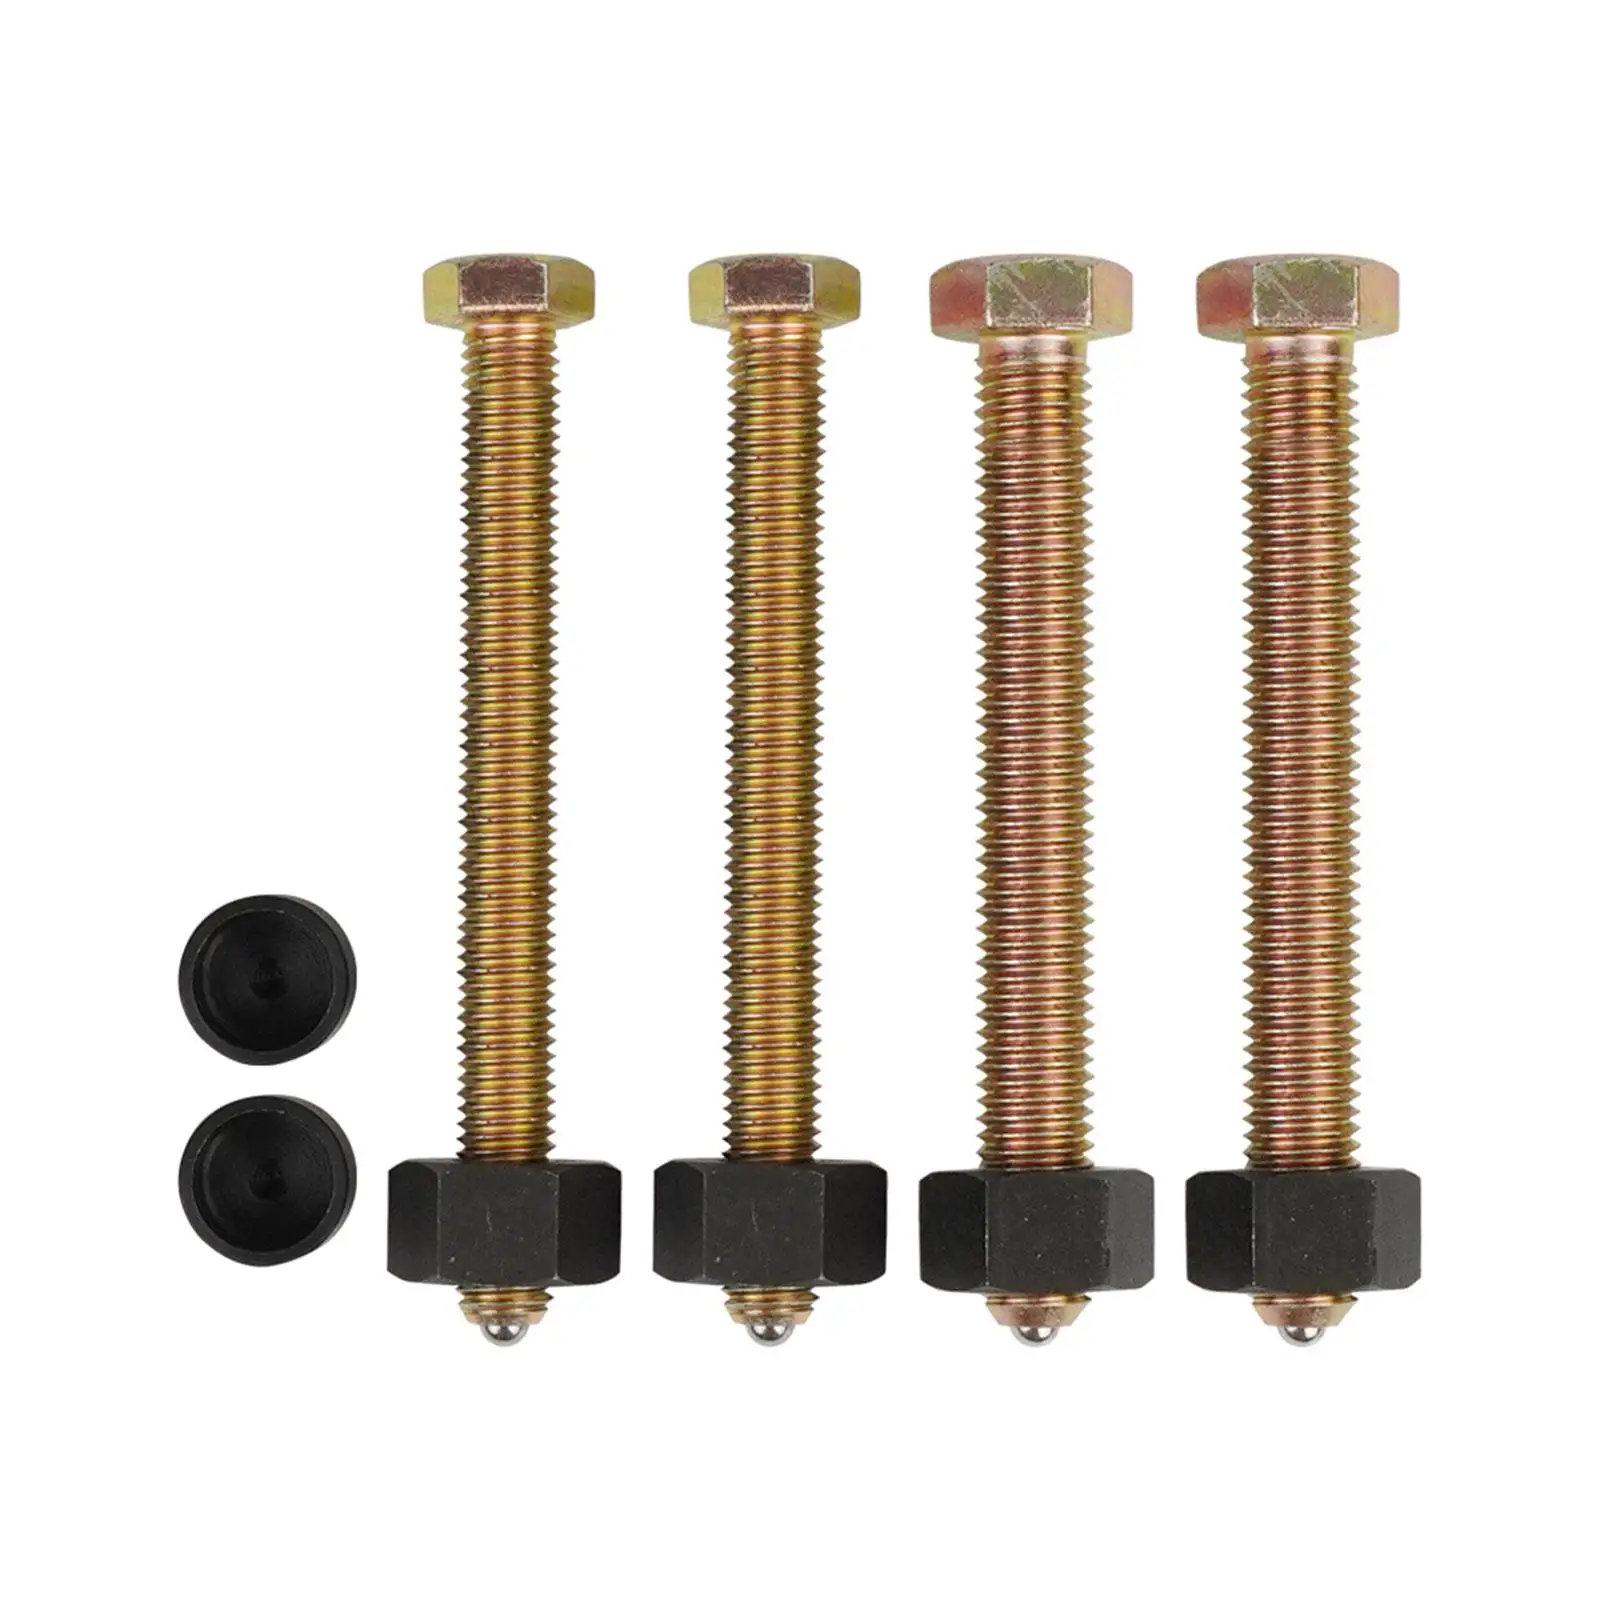 78834 Impact Rated Hub Removal Bolt Set Easy to Install Metal Replaces Bolts Spare Parts Accessories Pneumatic Tools Durable